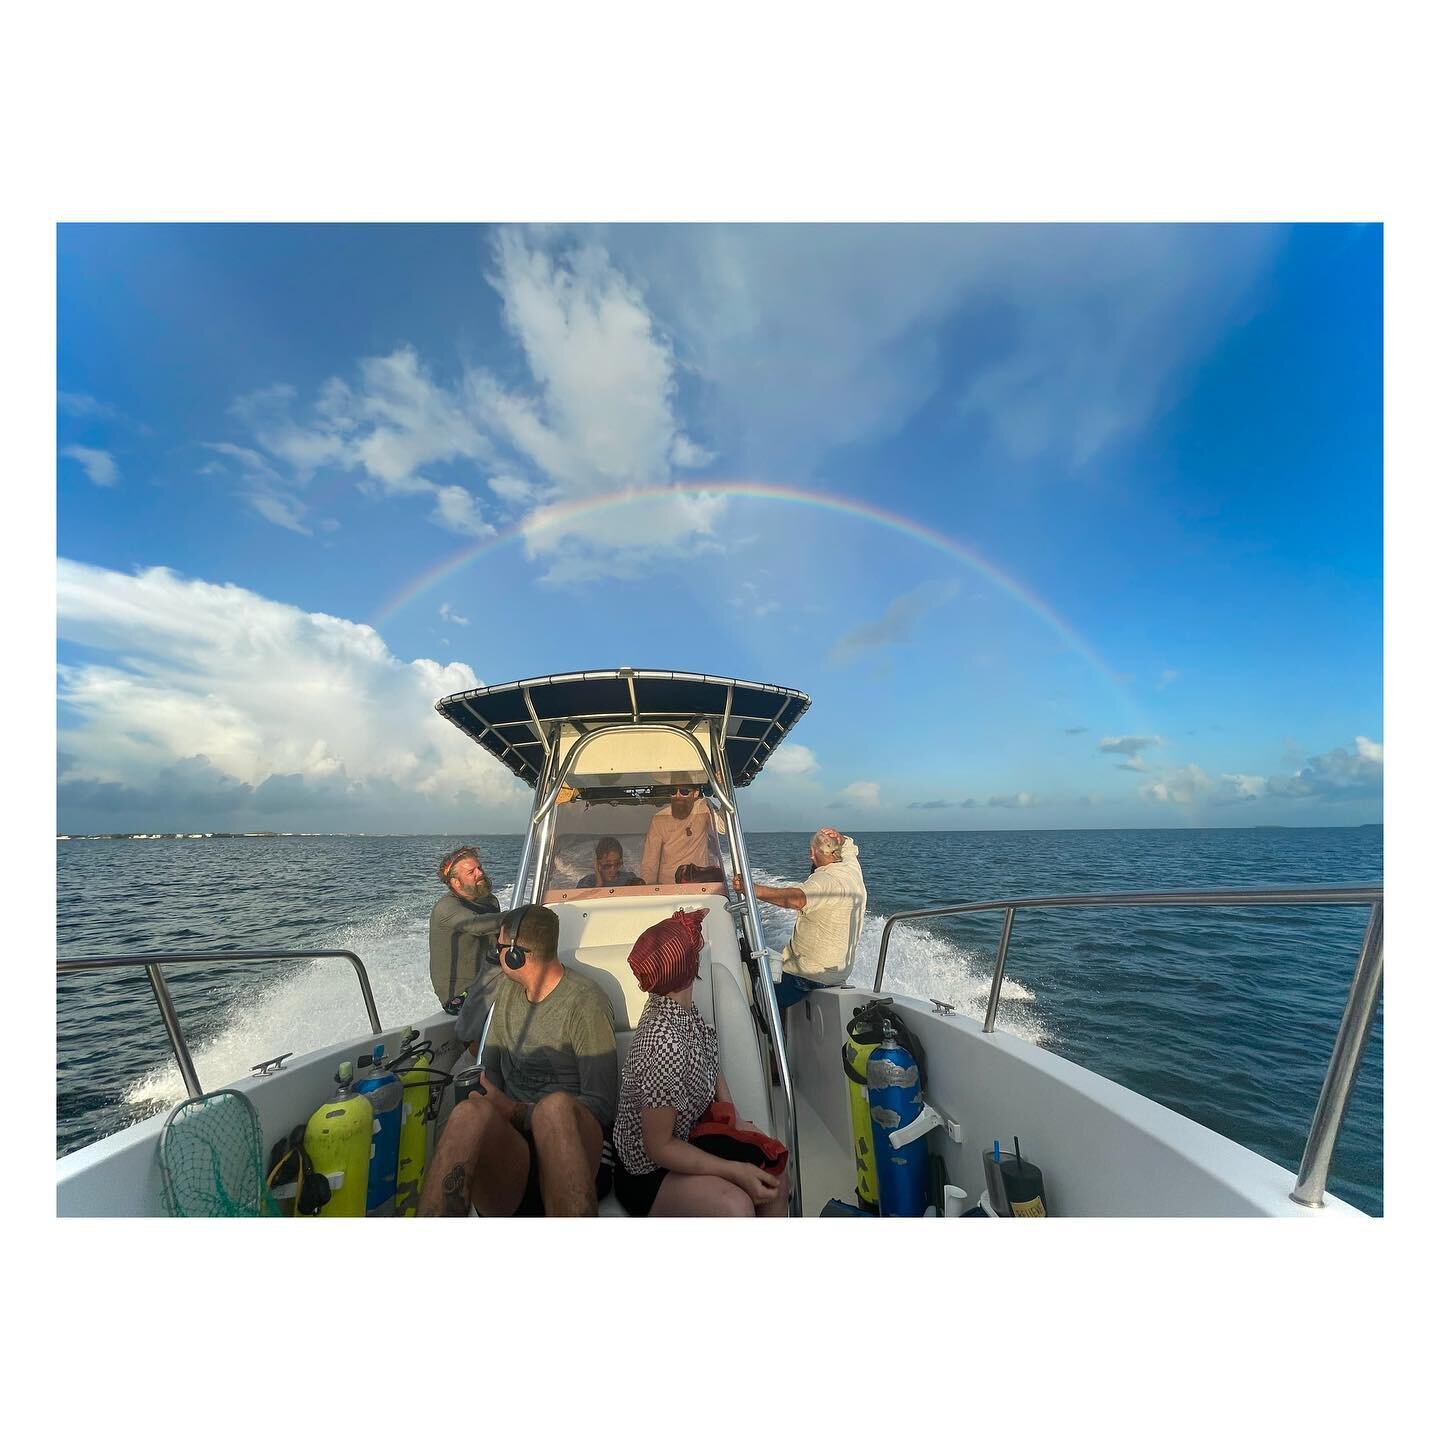 Rode on a boat through a full rainbow a few days ago, so I&rsquo;d say there&rsquo;s a lot that&rsquo;s really, really wonderful 🌈